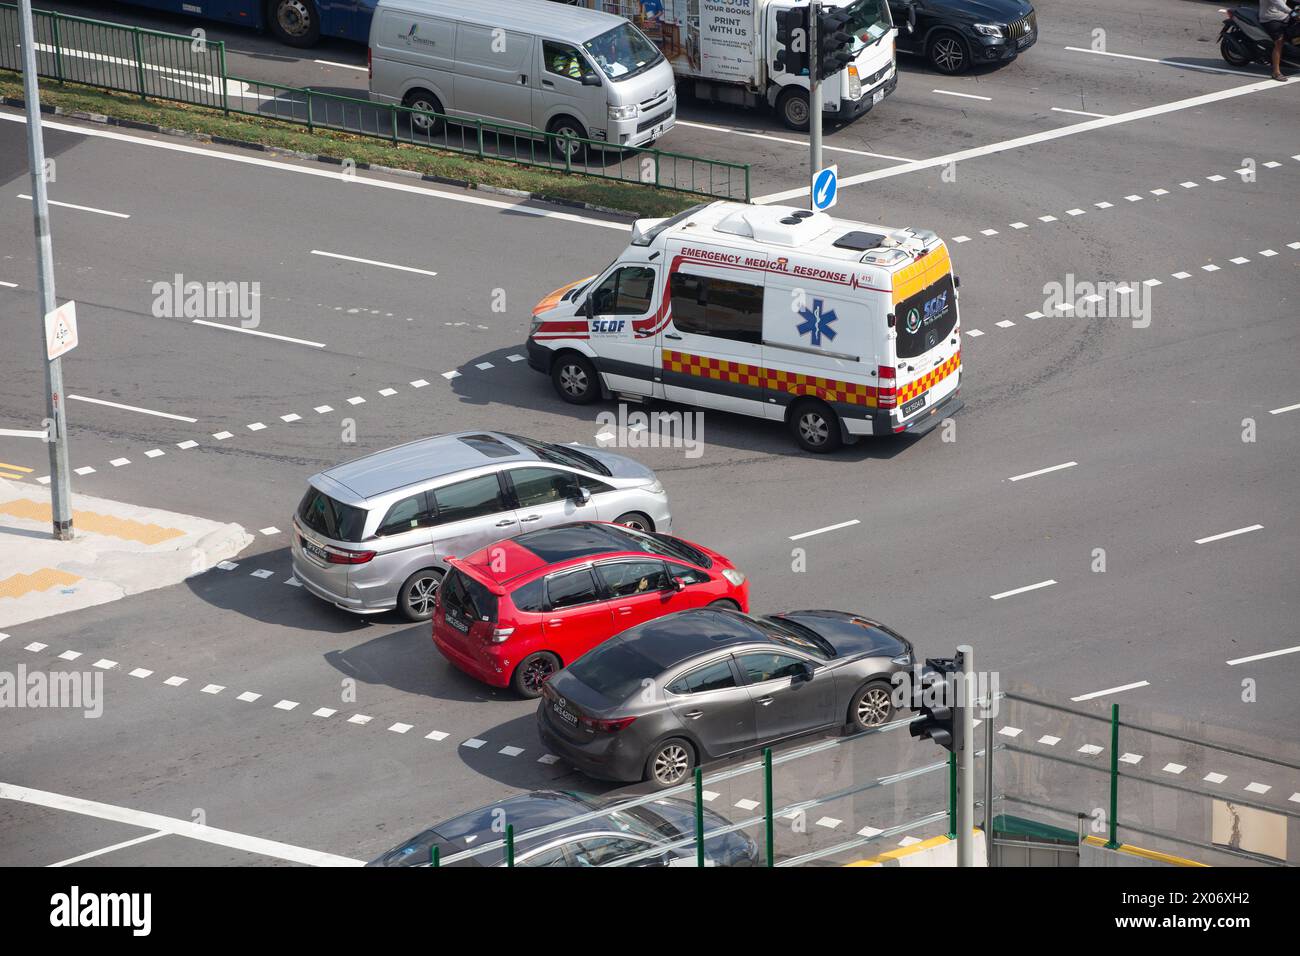 Elevated view of three cars stop after the dotted line to let the ambulance cross the junction first. Stock Photo